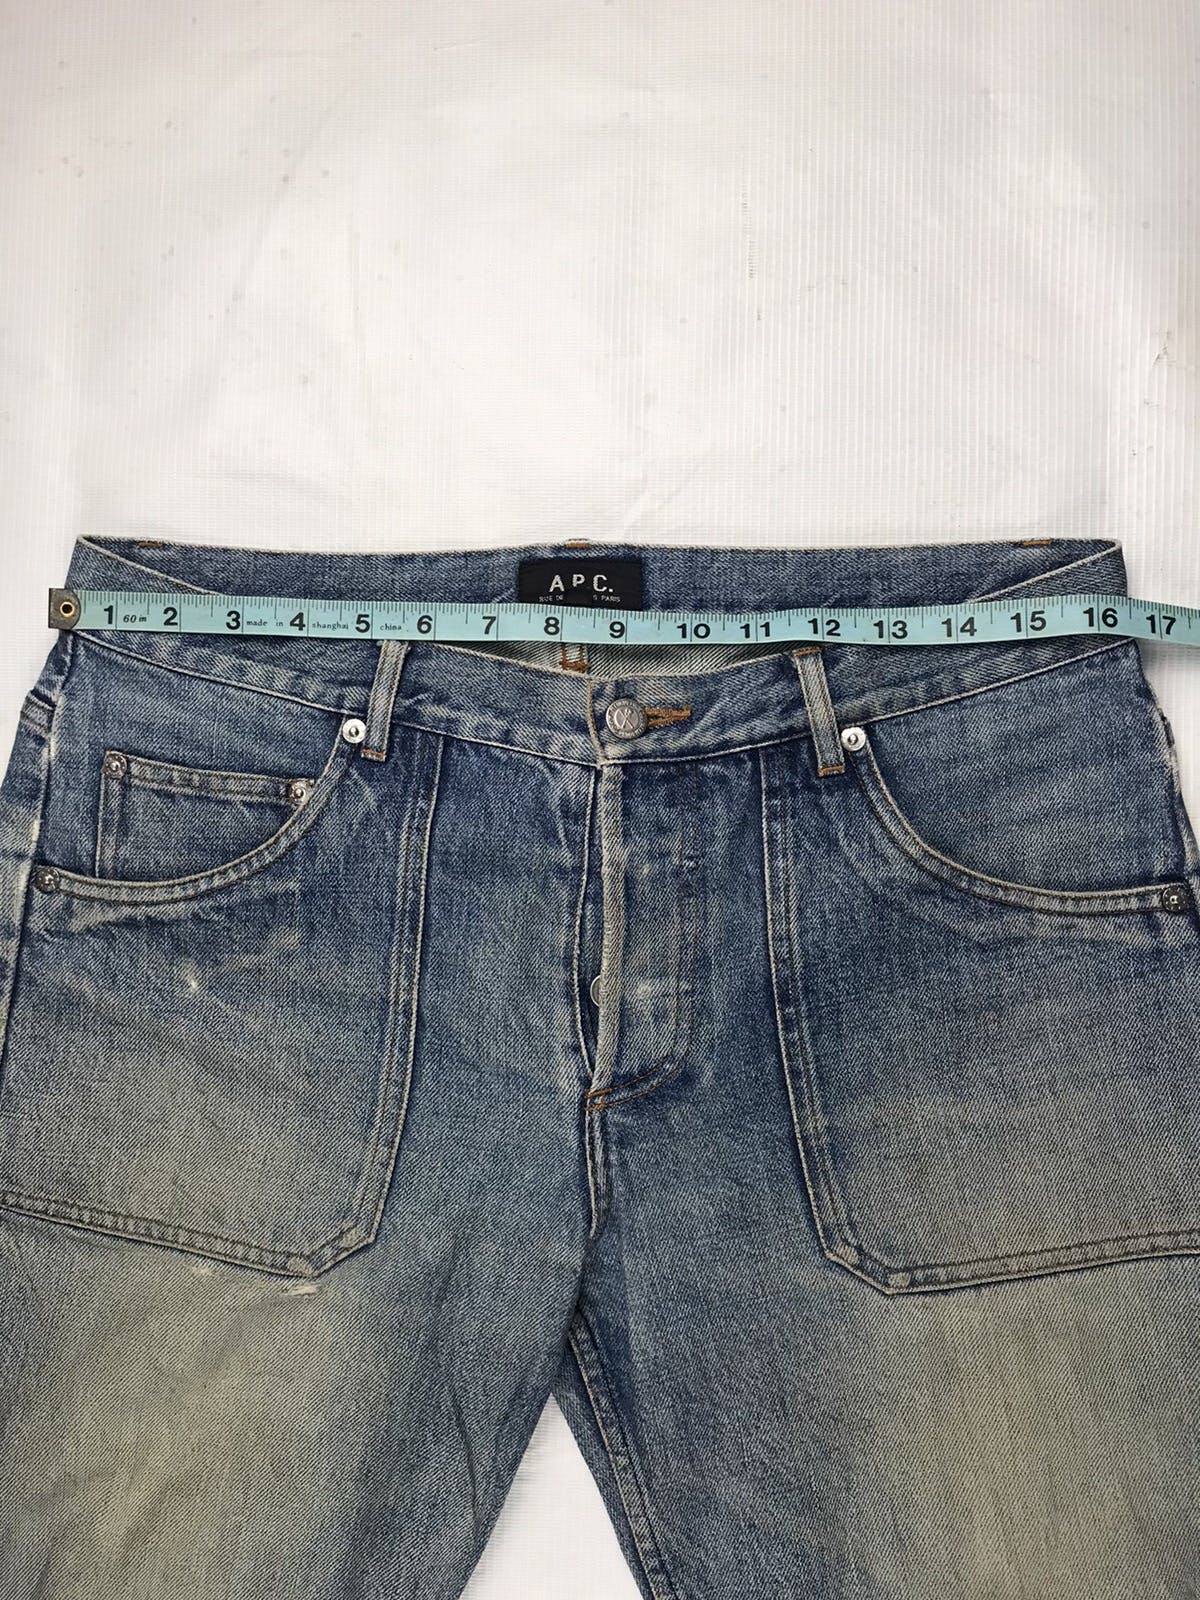 Rare!! A.P.C patch pocket distressed denim Made in Japan - 17